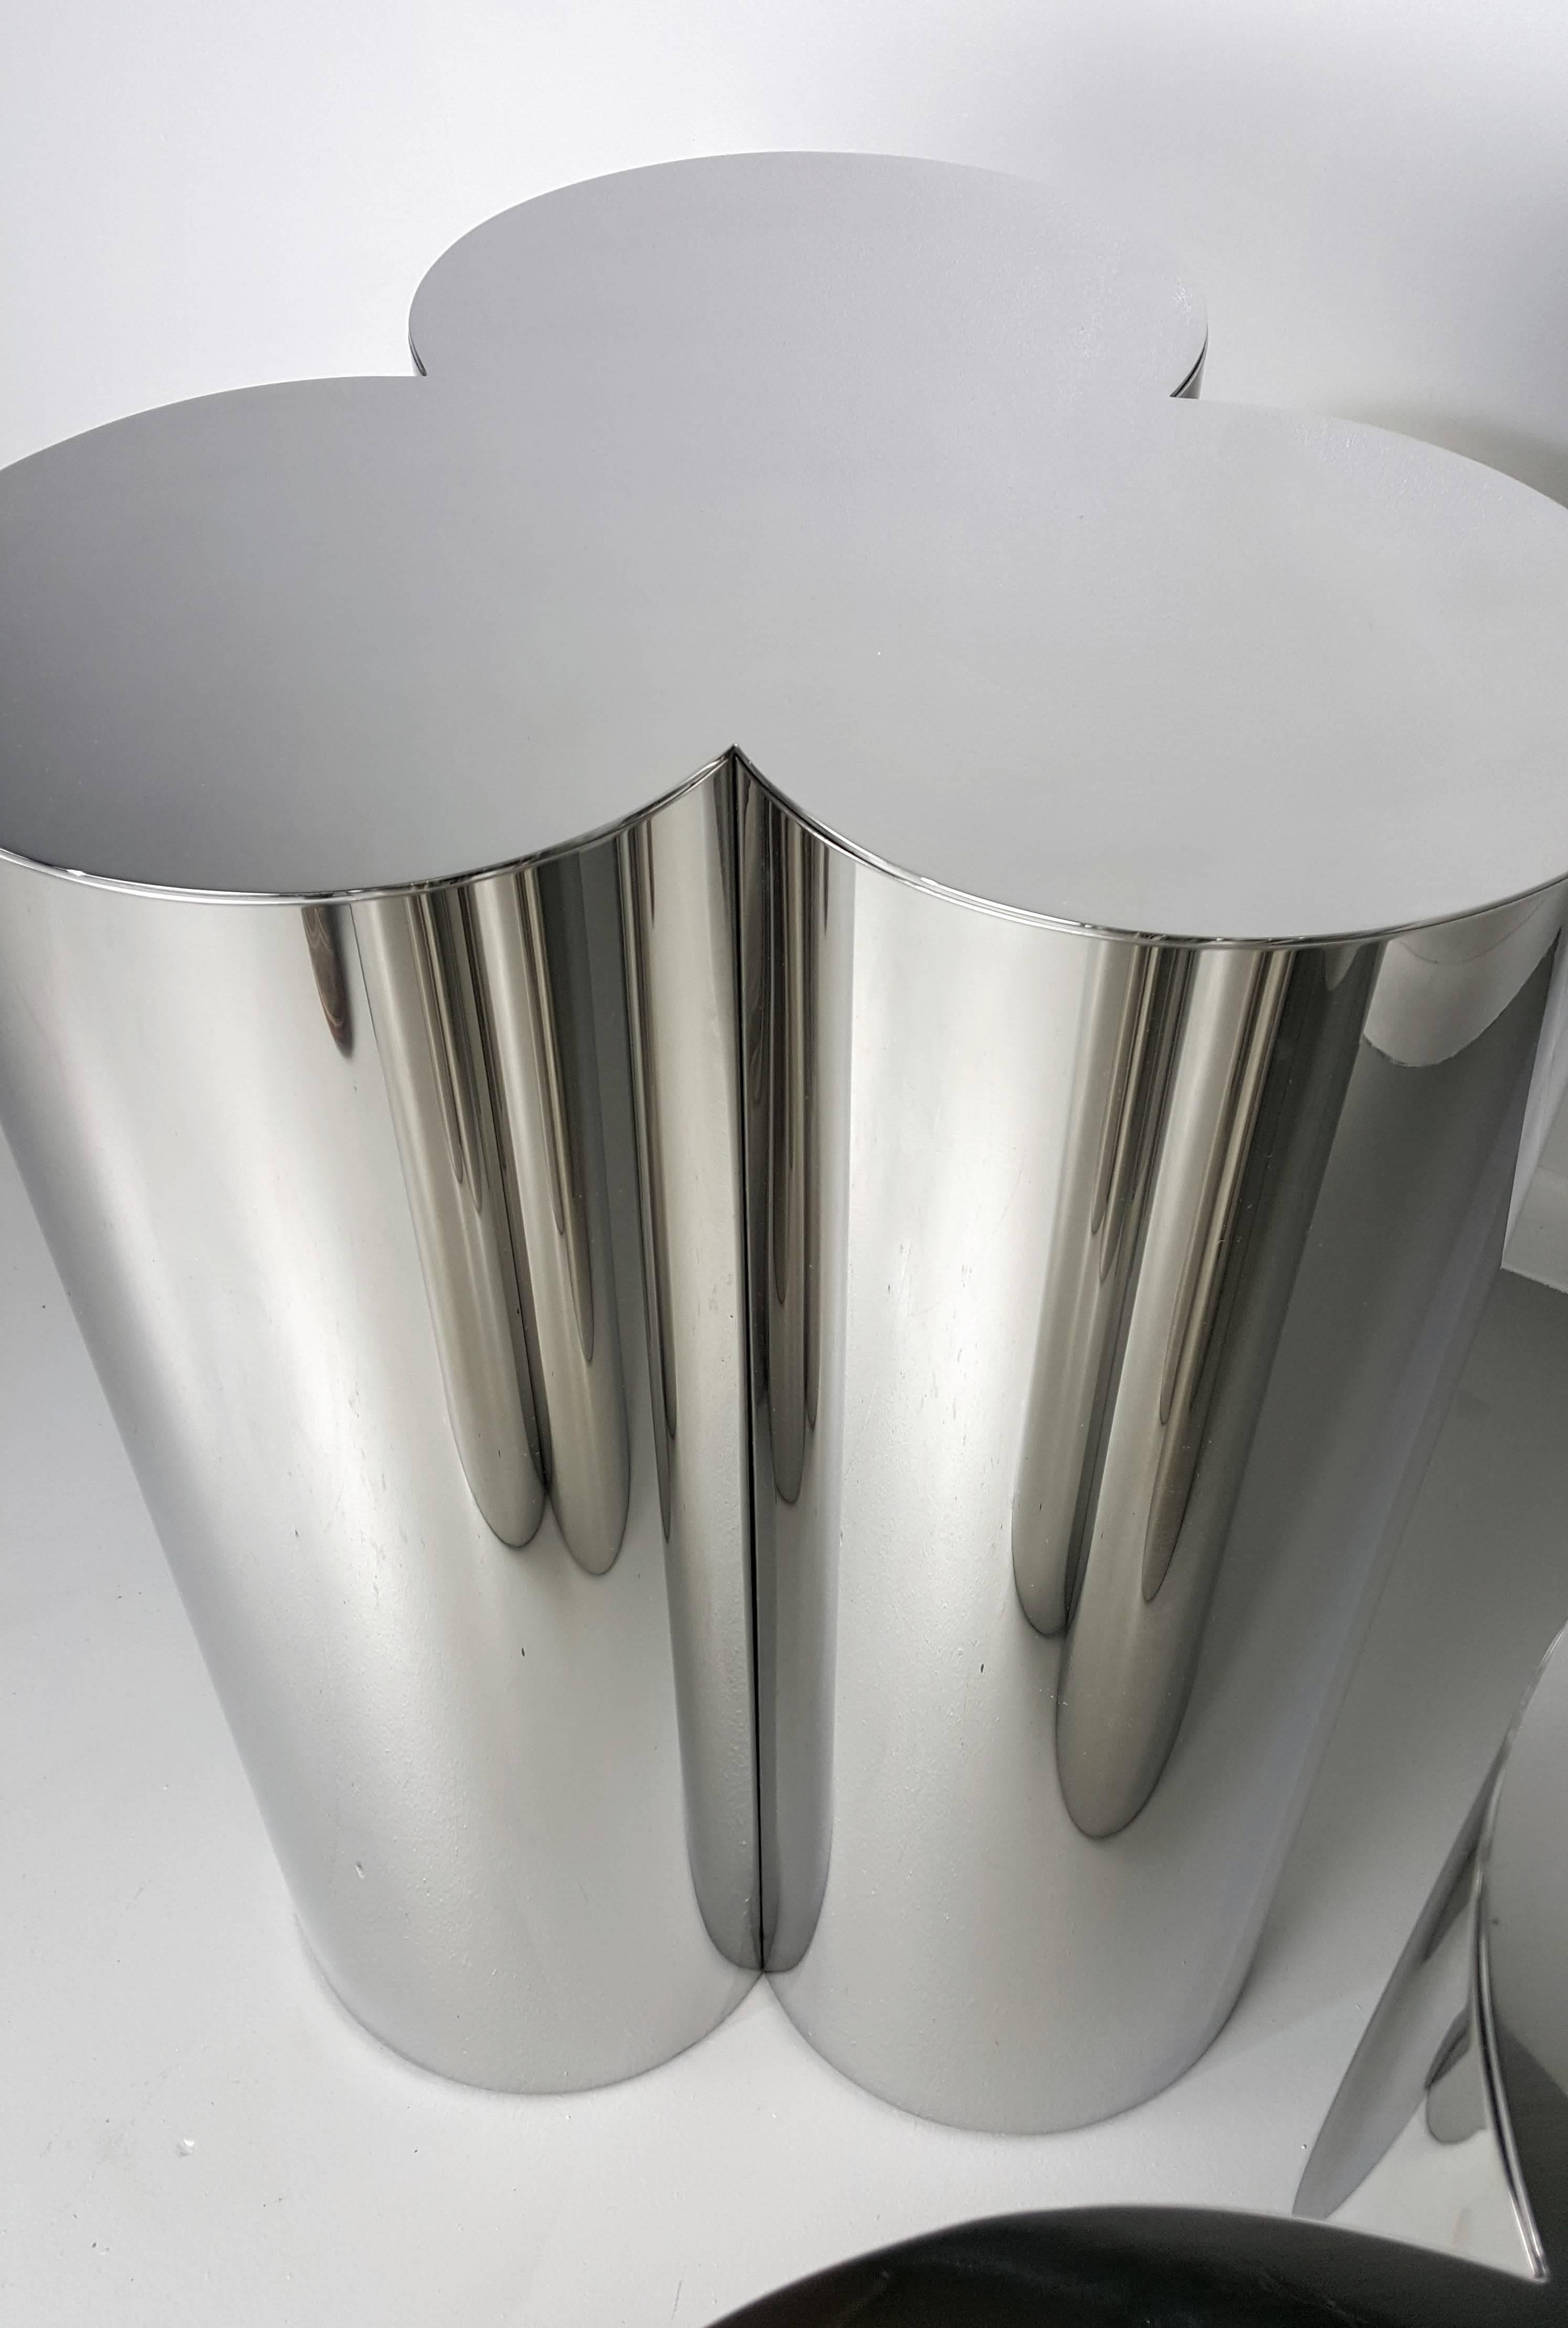 Polished Pair of Custom Trefoil Dining Table Base Pedestals in Mirror Stainless Steel